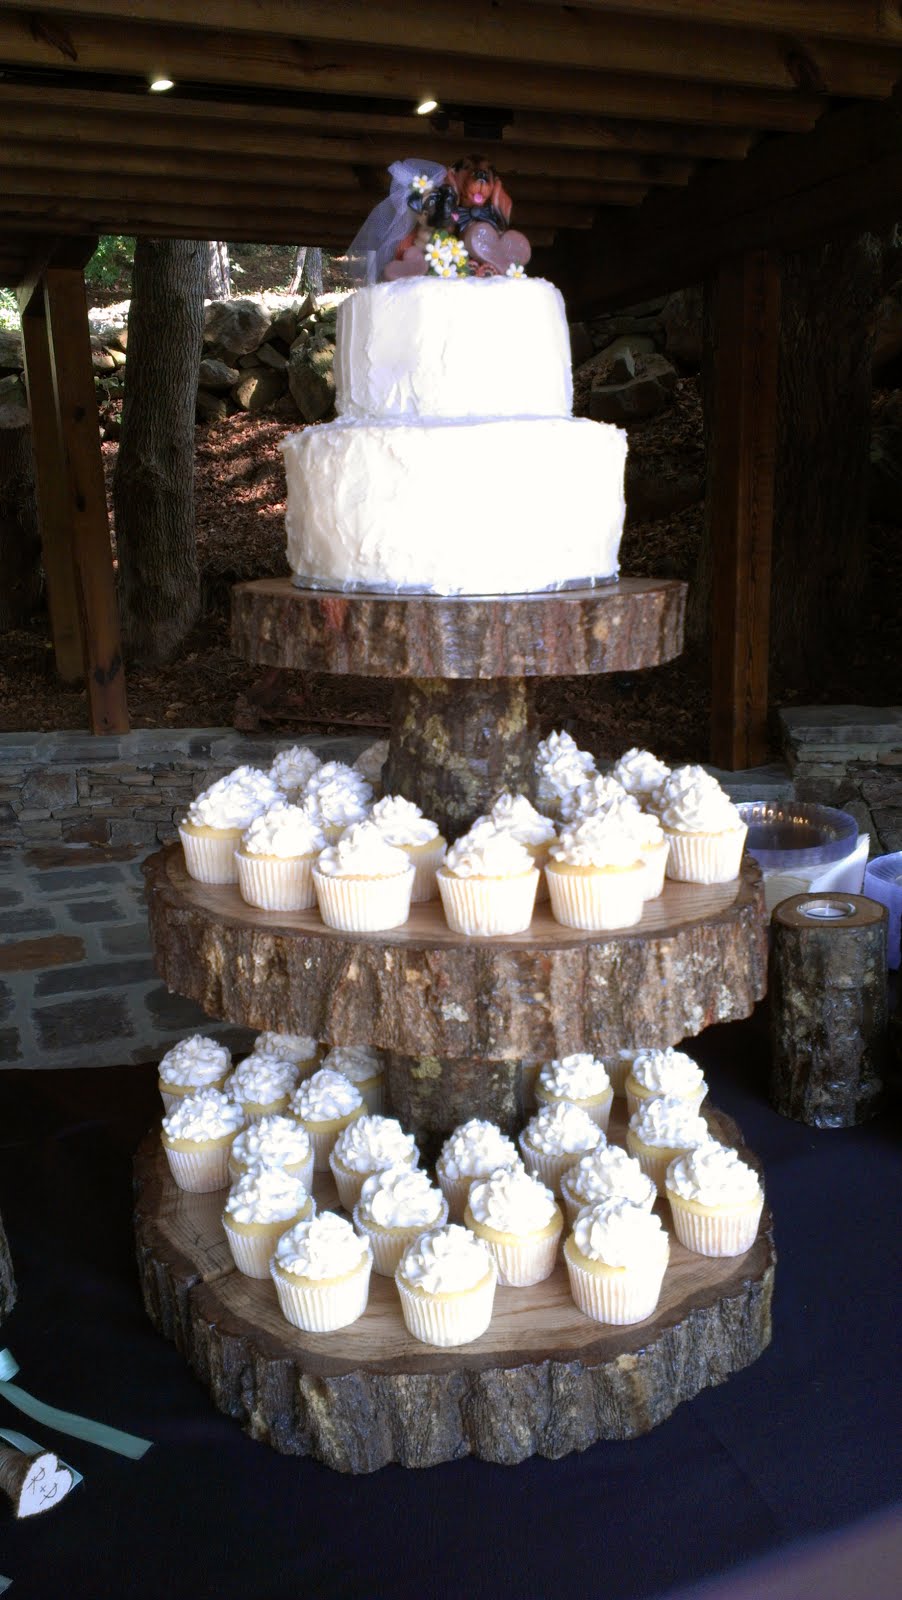 Rustic Wedding Cakes with Cupcakes